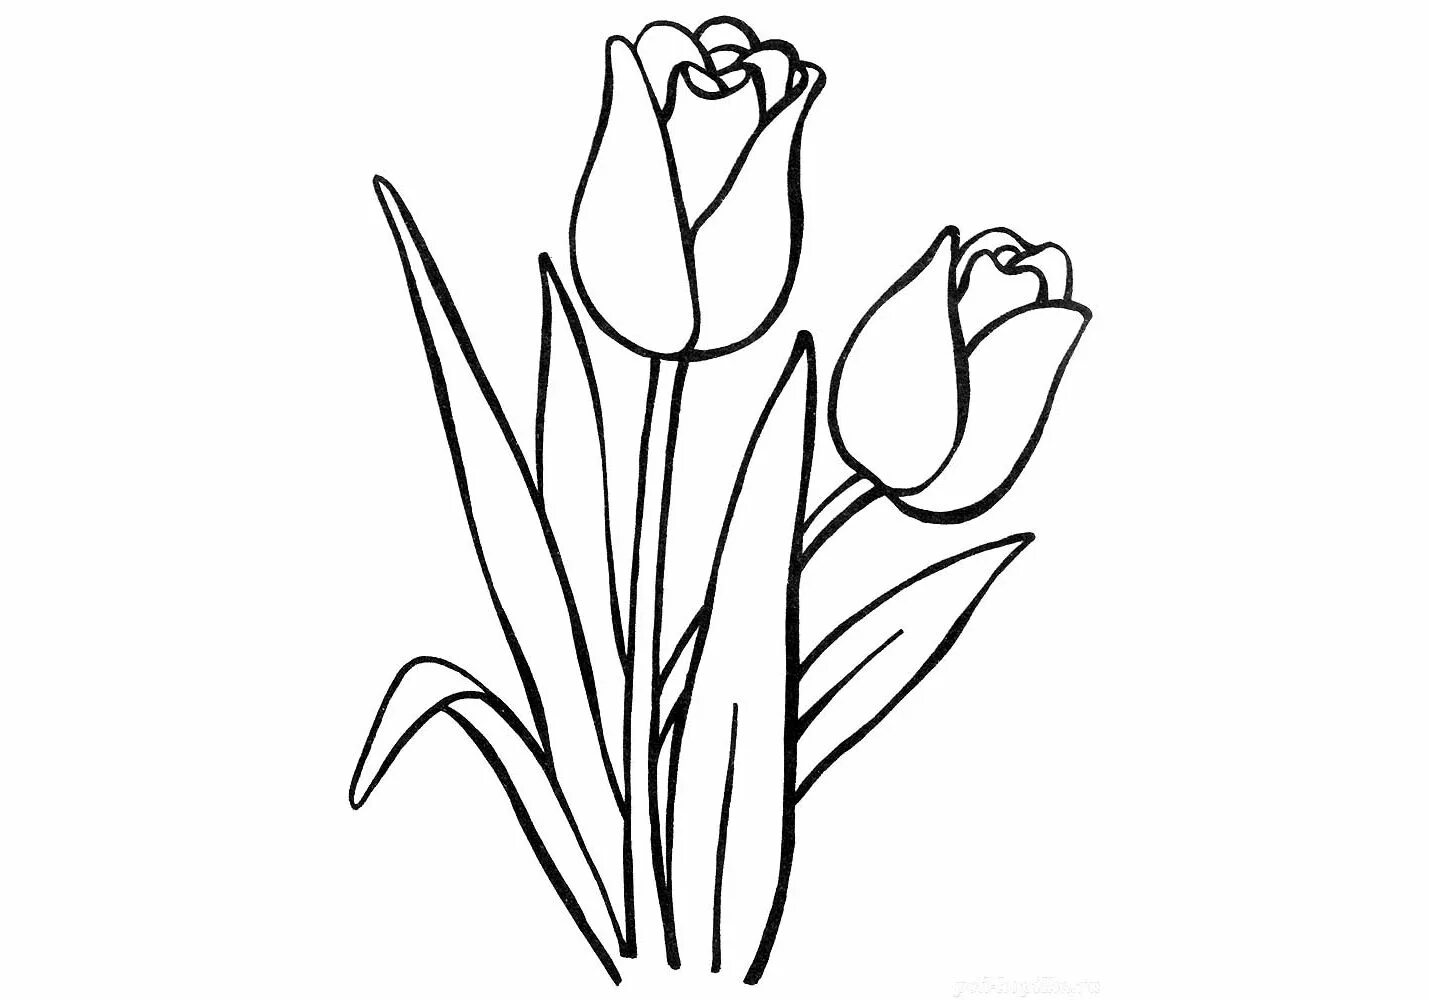 Coloring book cute tulips for children 5-6 years old